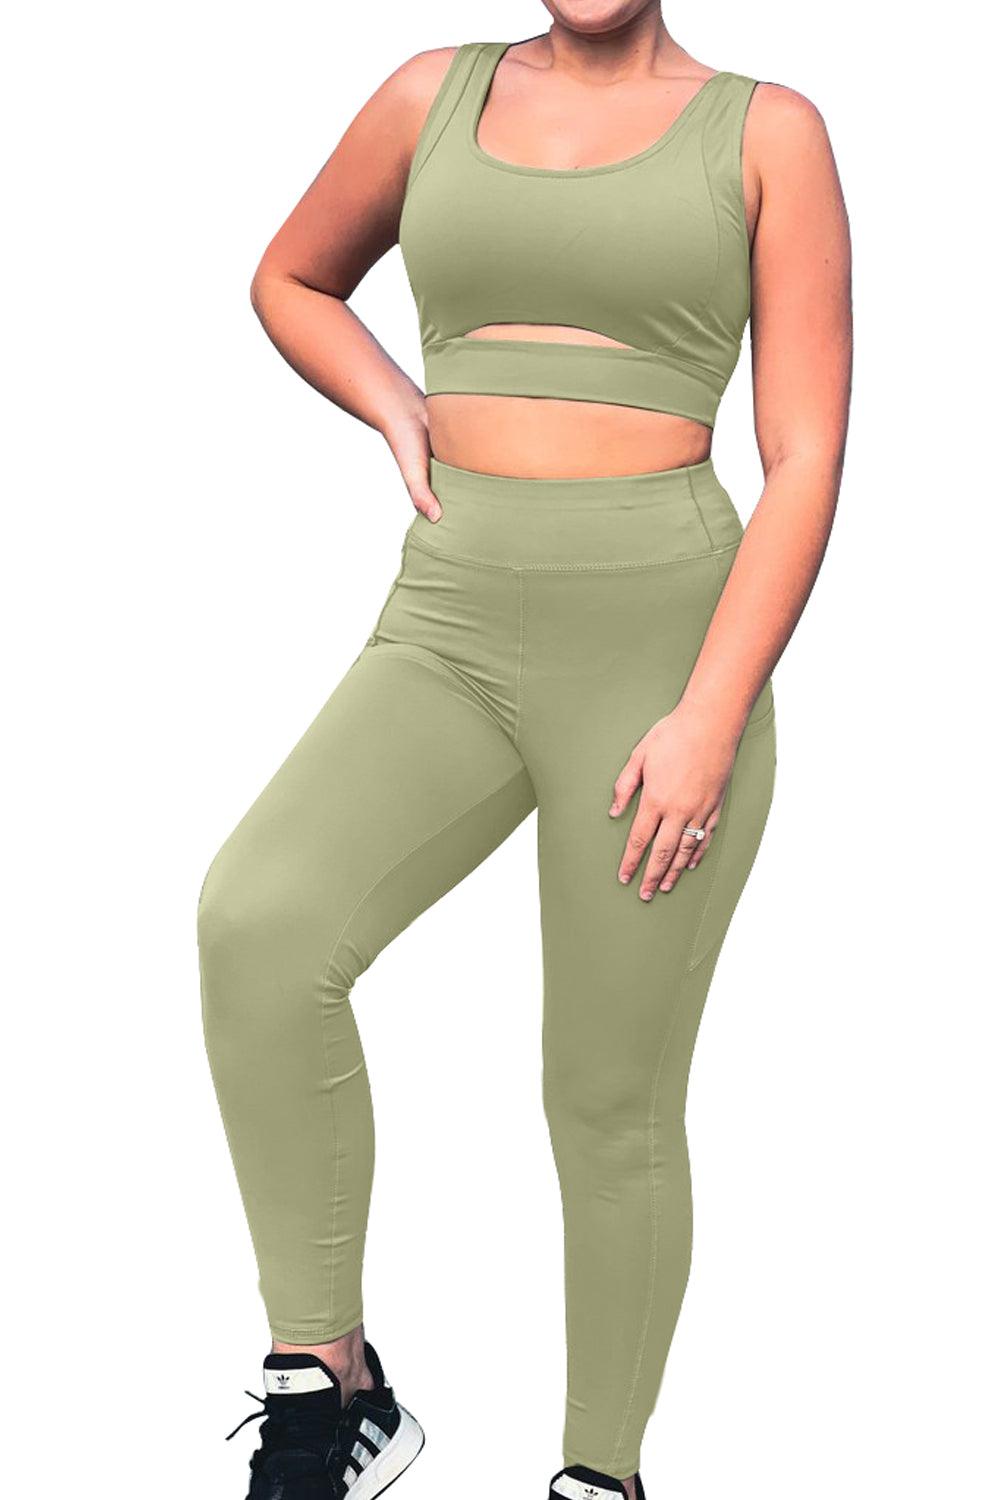 Army Green Two-piece Cut out Bra and Leggings Sports Wear - L & M Kee, LLC